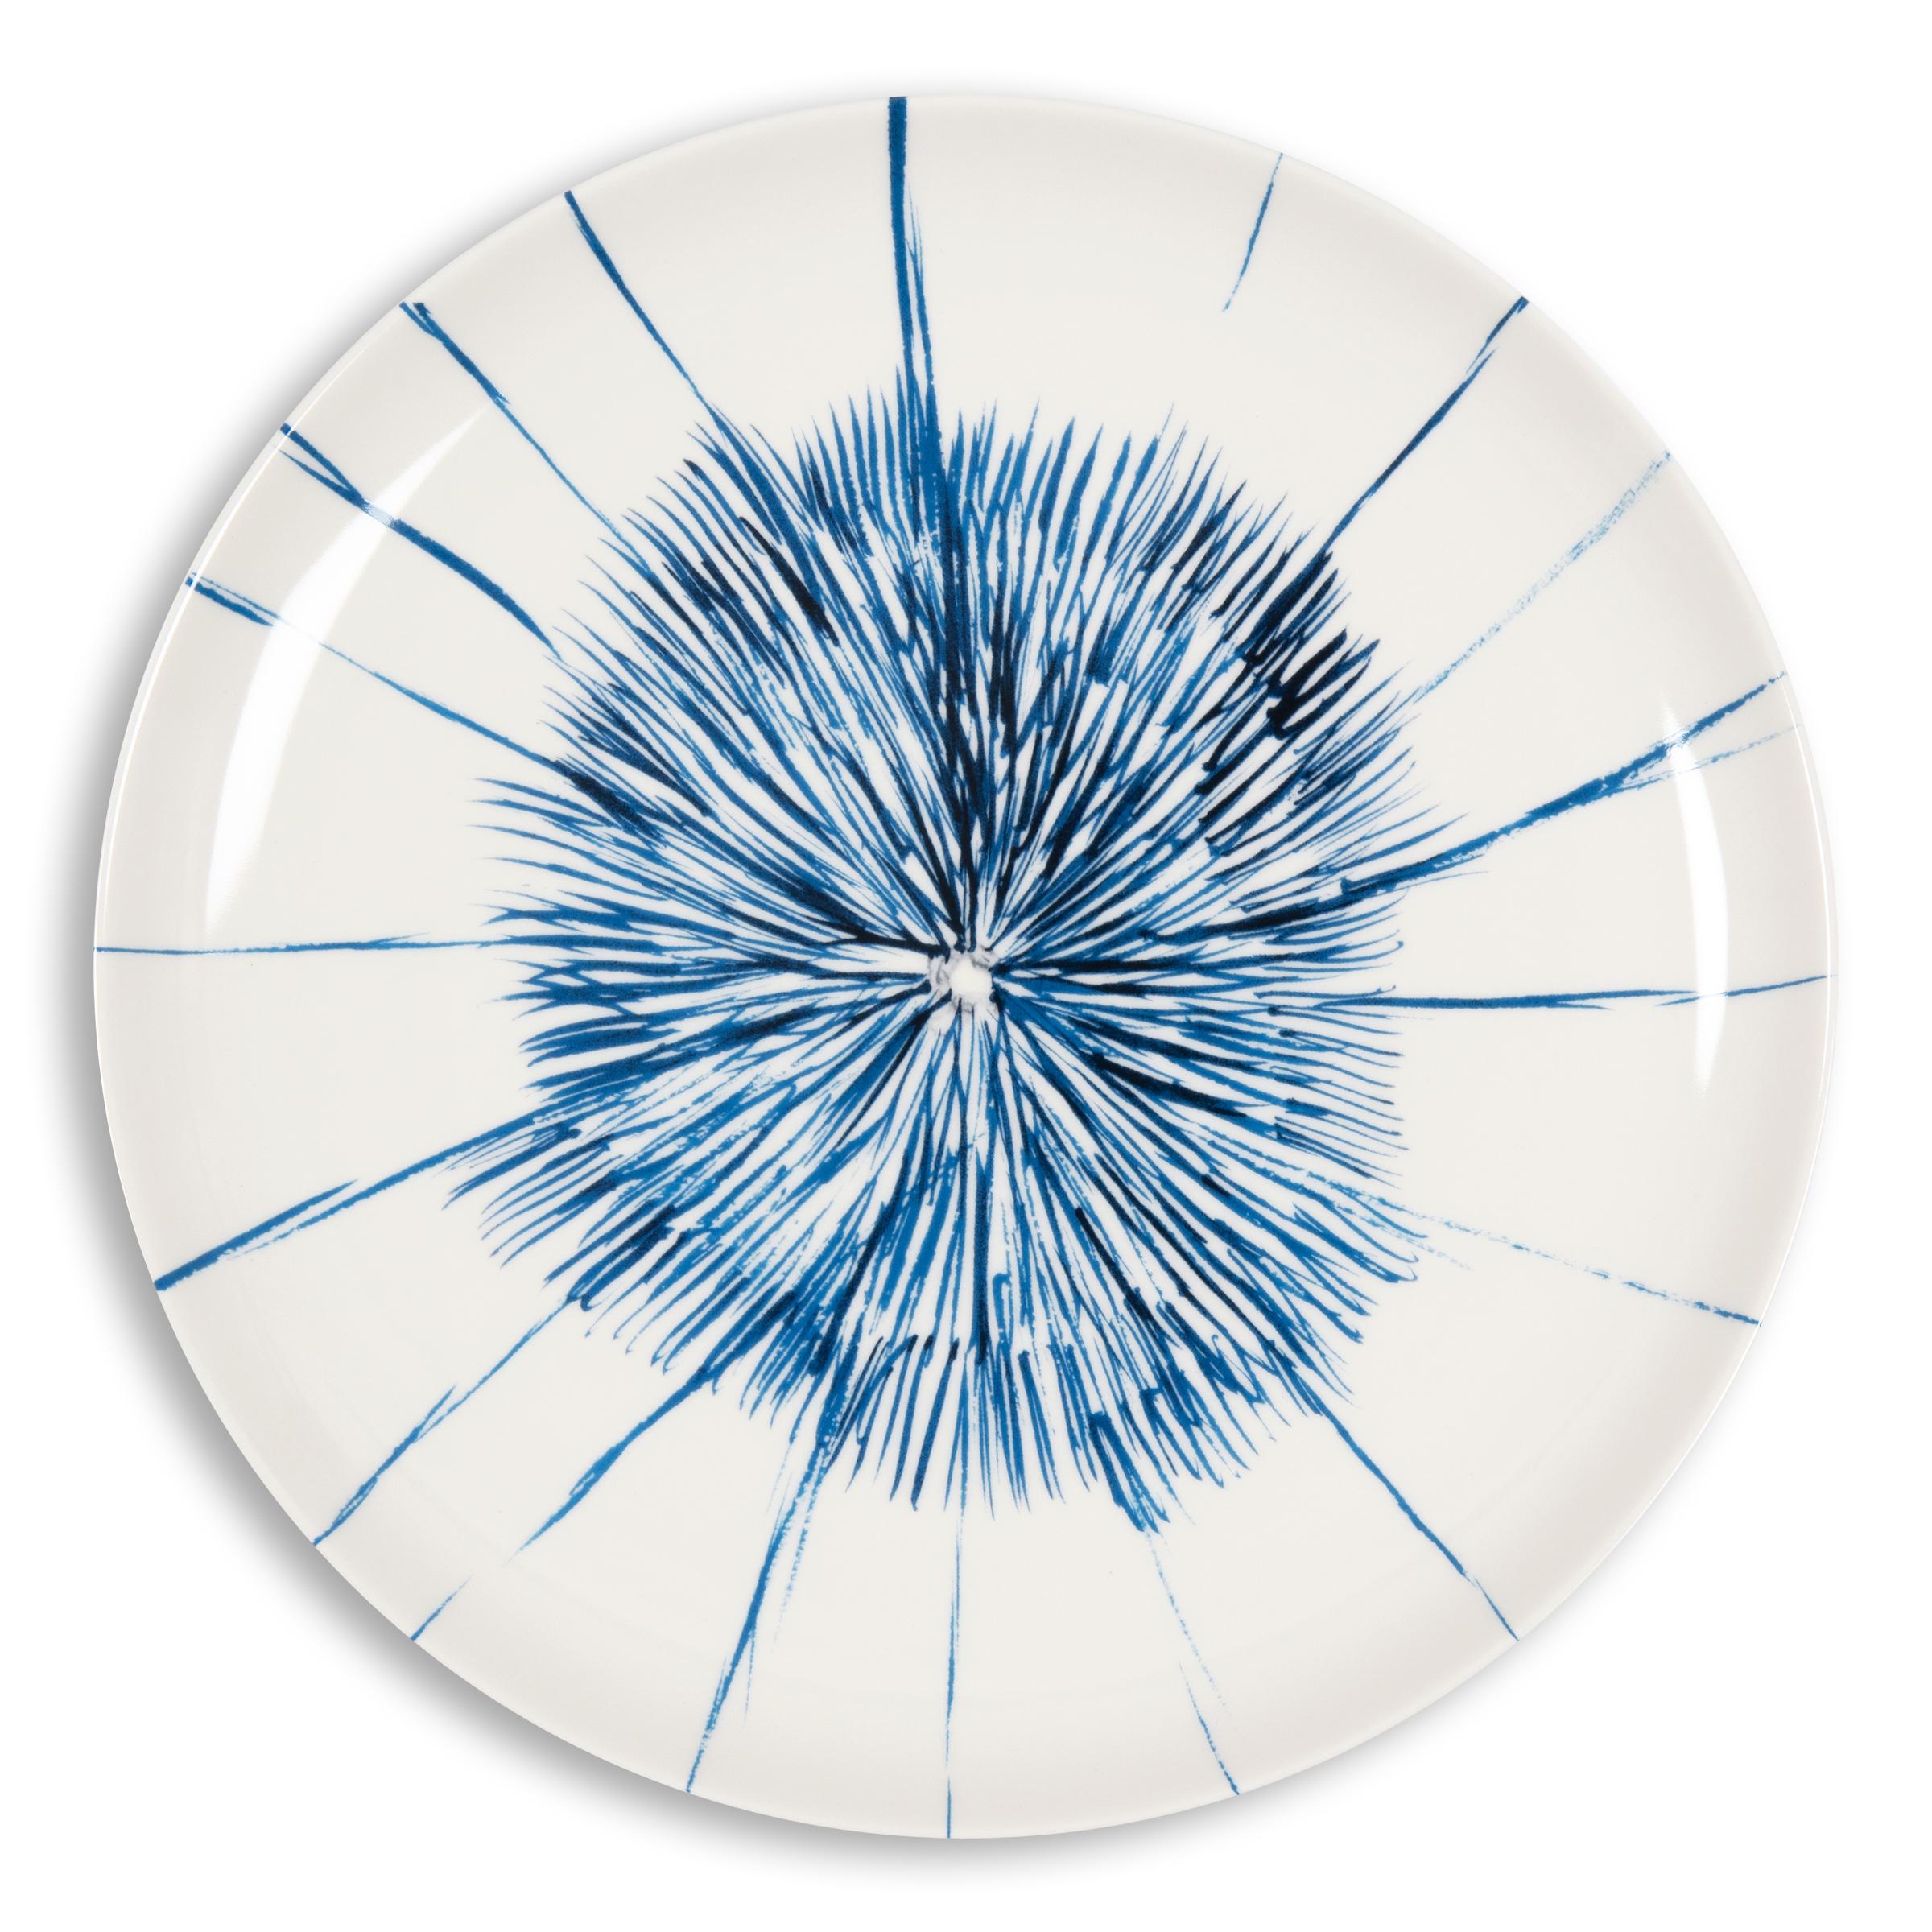 Louise Bourgeois (French-American, 1911-2010)
Je t'aime, 2005/2023
Medium: Fine bone china plate
Dimensions: 26.7 diameter (10.5 in)
Edition of 250: Not signed, not numbered (Printed signature and edition details on verso)
Condition: Mint (in